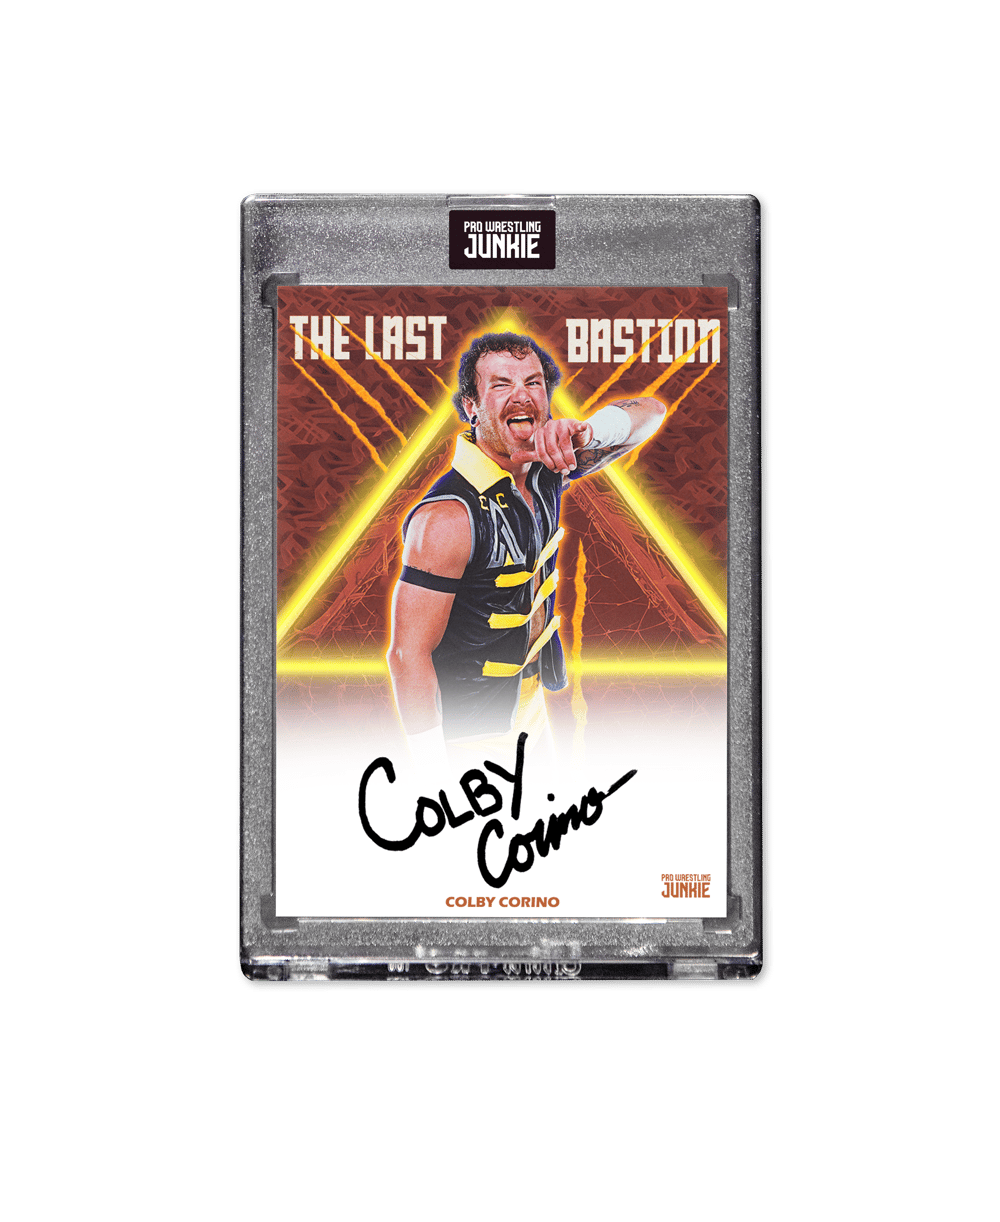 Auto and Base Collectible Card Combo by PWJ